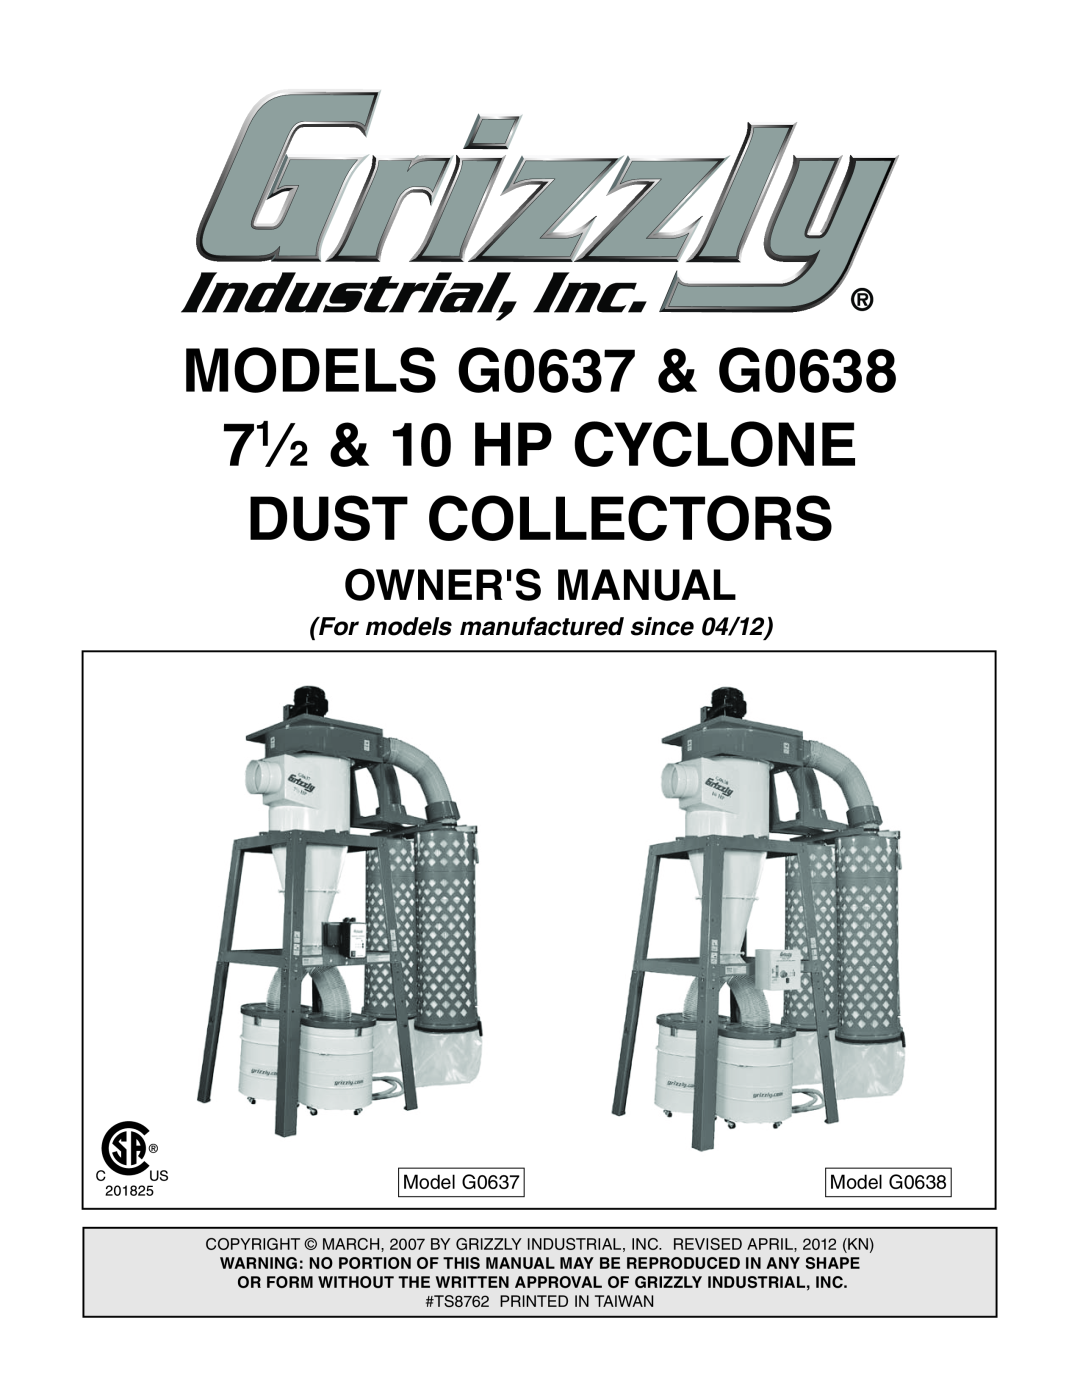 Grizzly owner manual Owners Manual, MODELS G0637 & G0638, 71⁄2 & 10 HP CYCLONE DUST COLLECTORS, BdYZa %+, BdYZa<%+ 